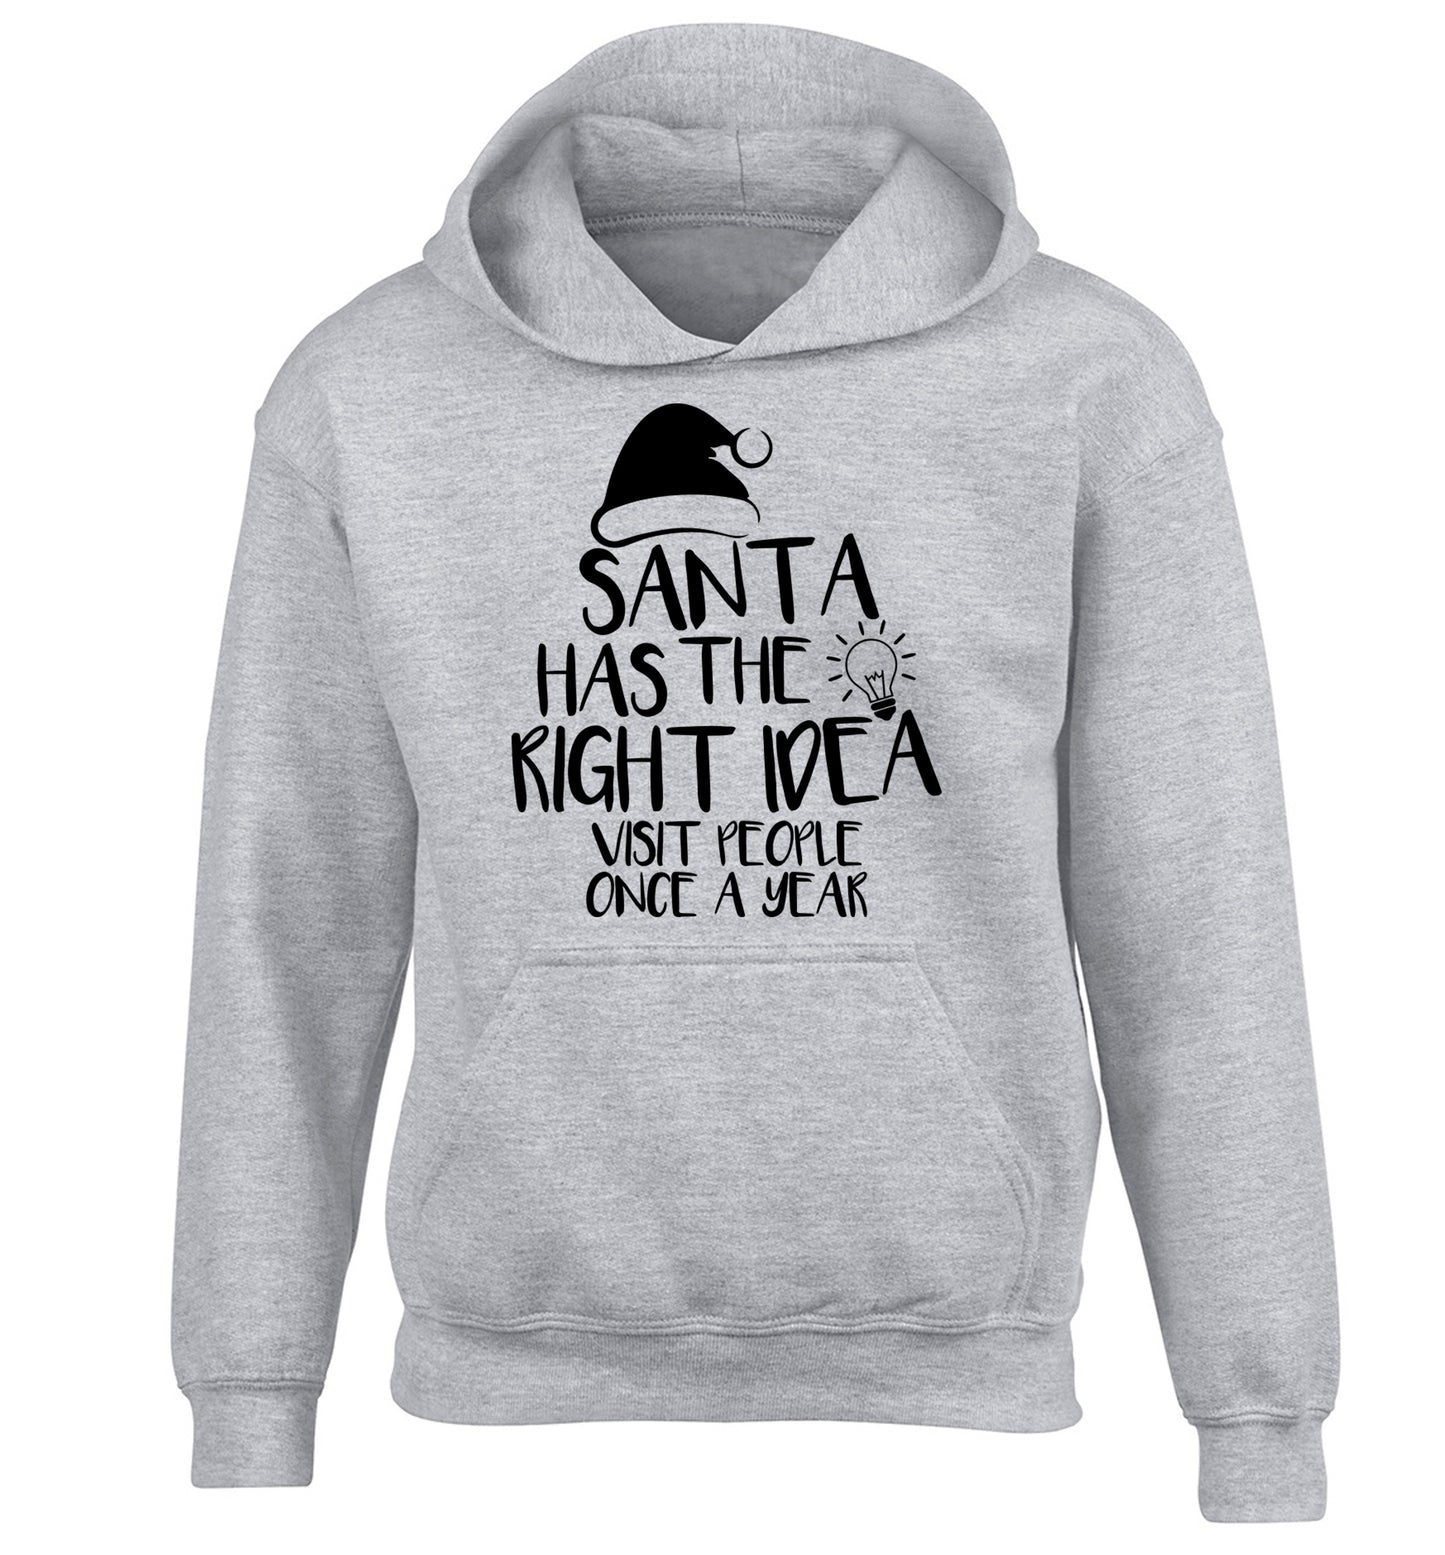 Santa has the right idea visit people once a year children's grey hoodie 12-14 Years